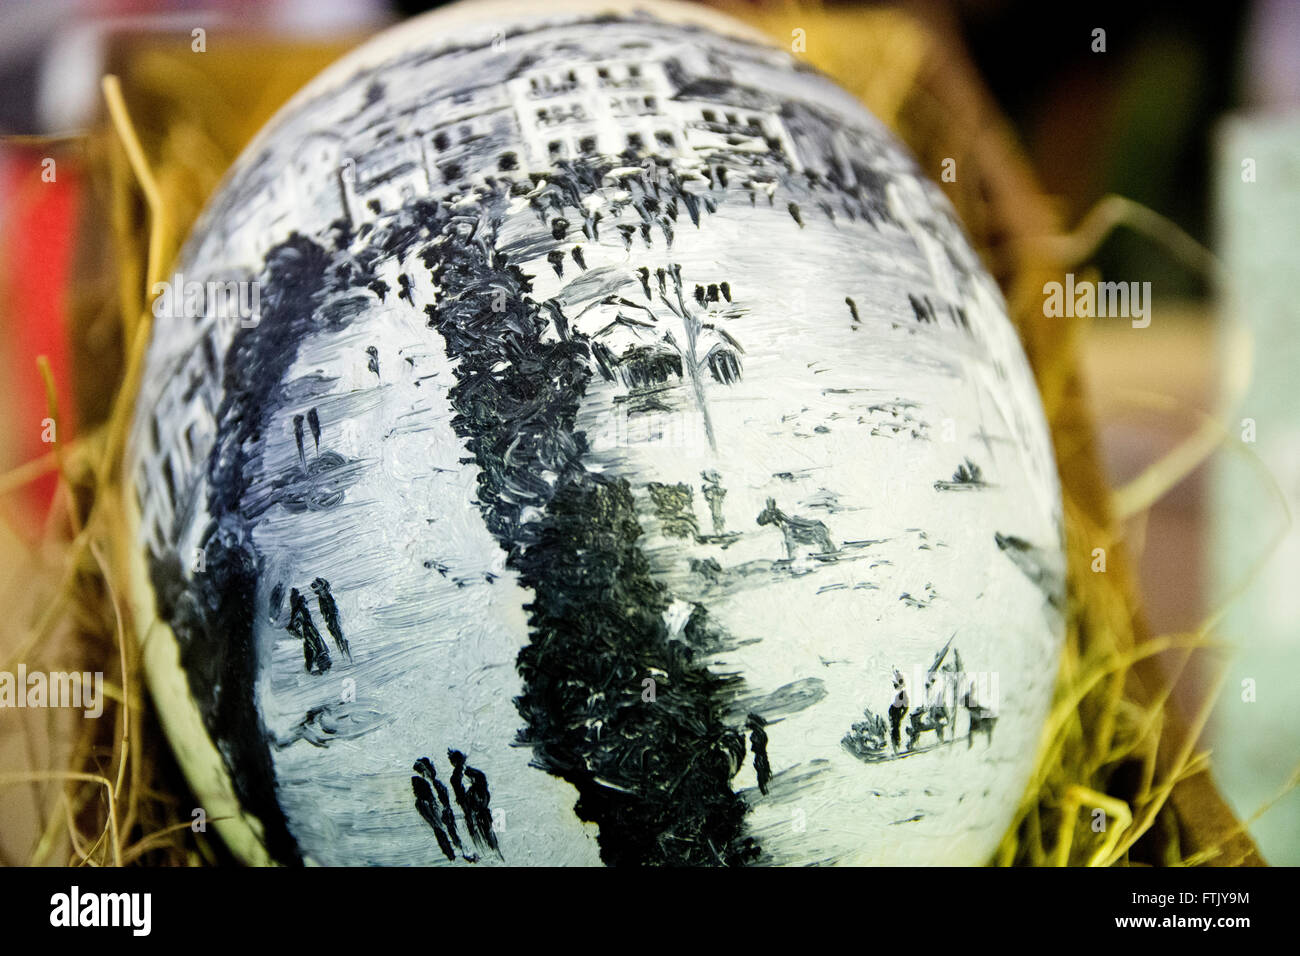 Pola de Siero, Spain. 29th March, 2016. A painted ostrich egg which represents an Asturian city at the Feast of Easter Eggs of Pola de Siero, the only Spanish city in which this feast is celebrated, on the first Tuesday after Easter Sunday, with thousands of eggs painted by hand. © David Gato/Alamy Live News Stock Photo